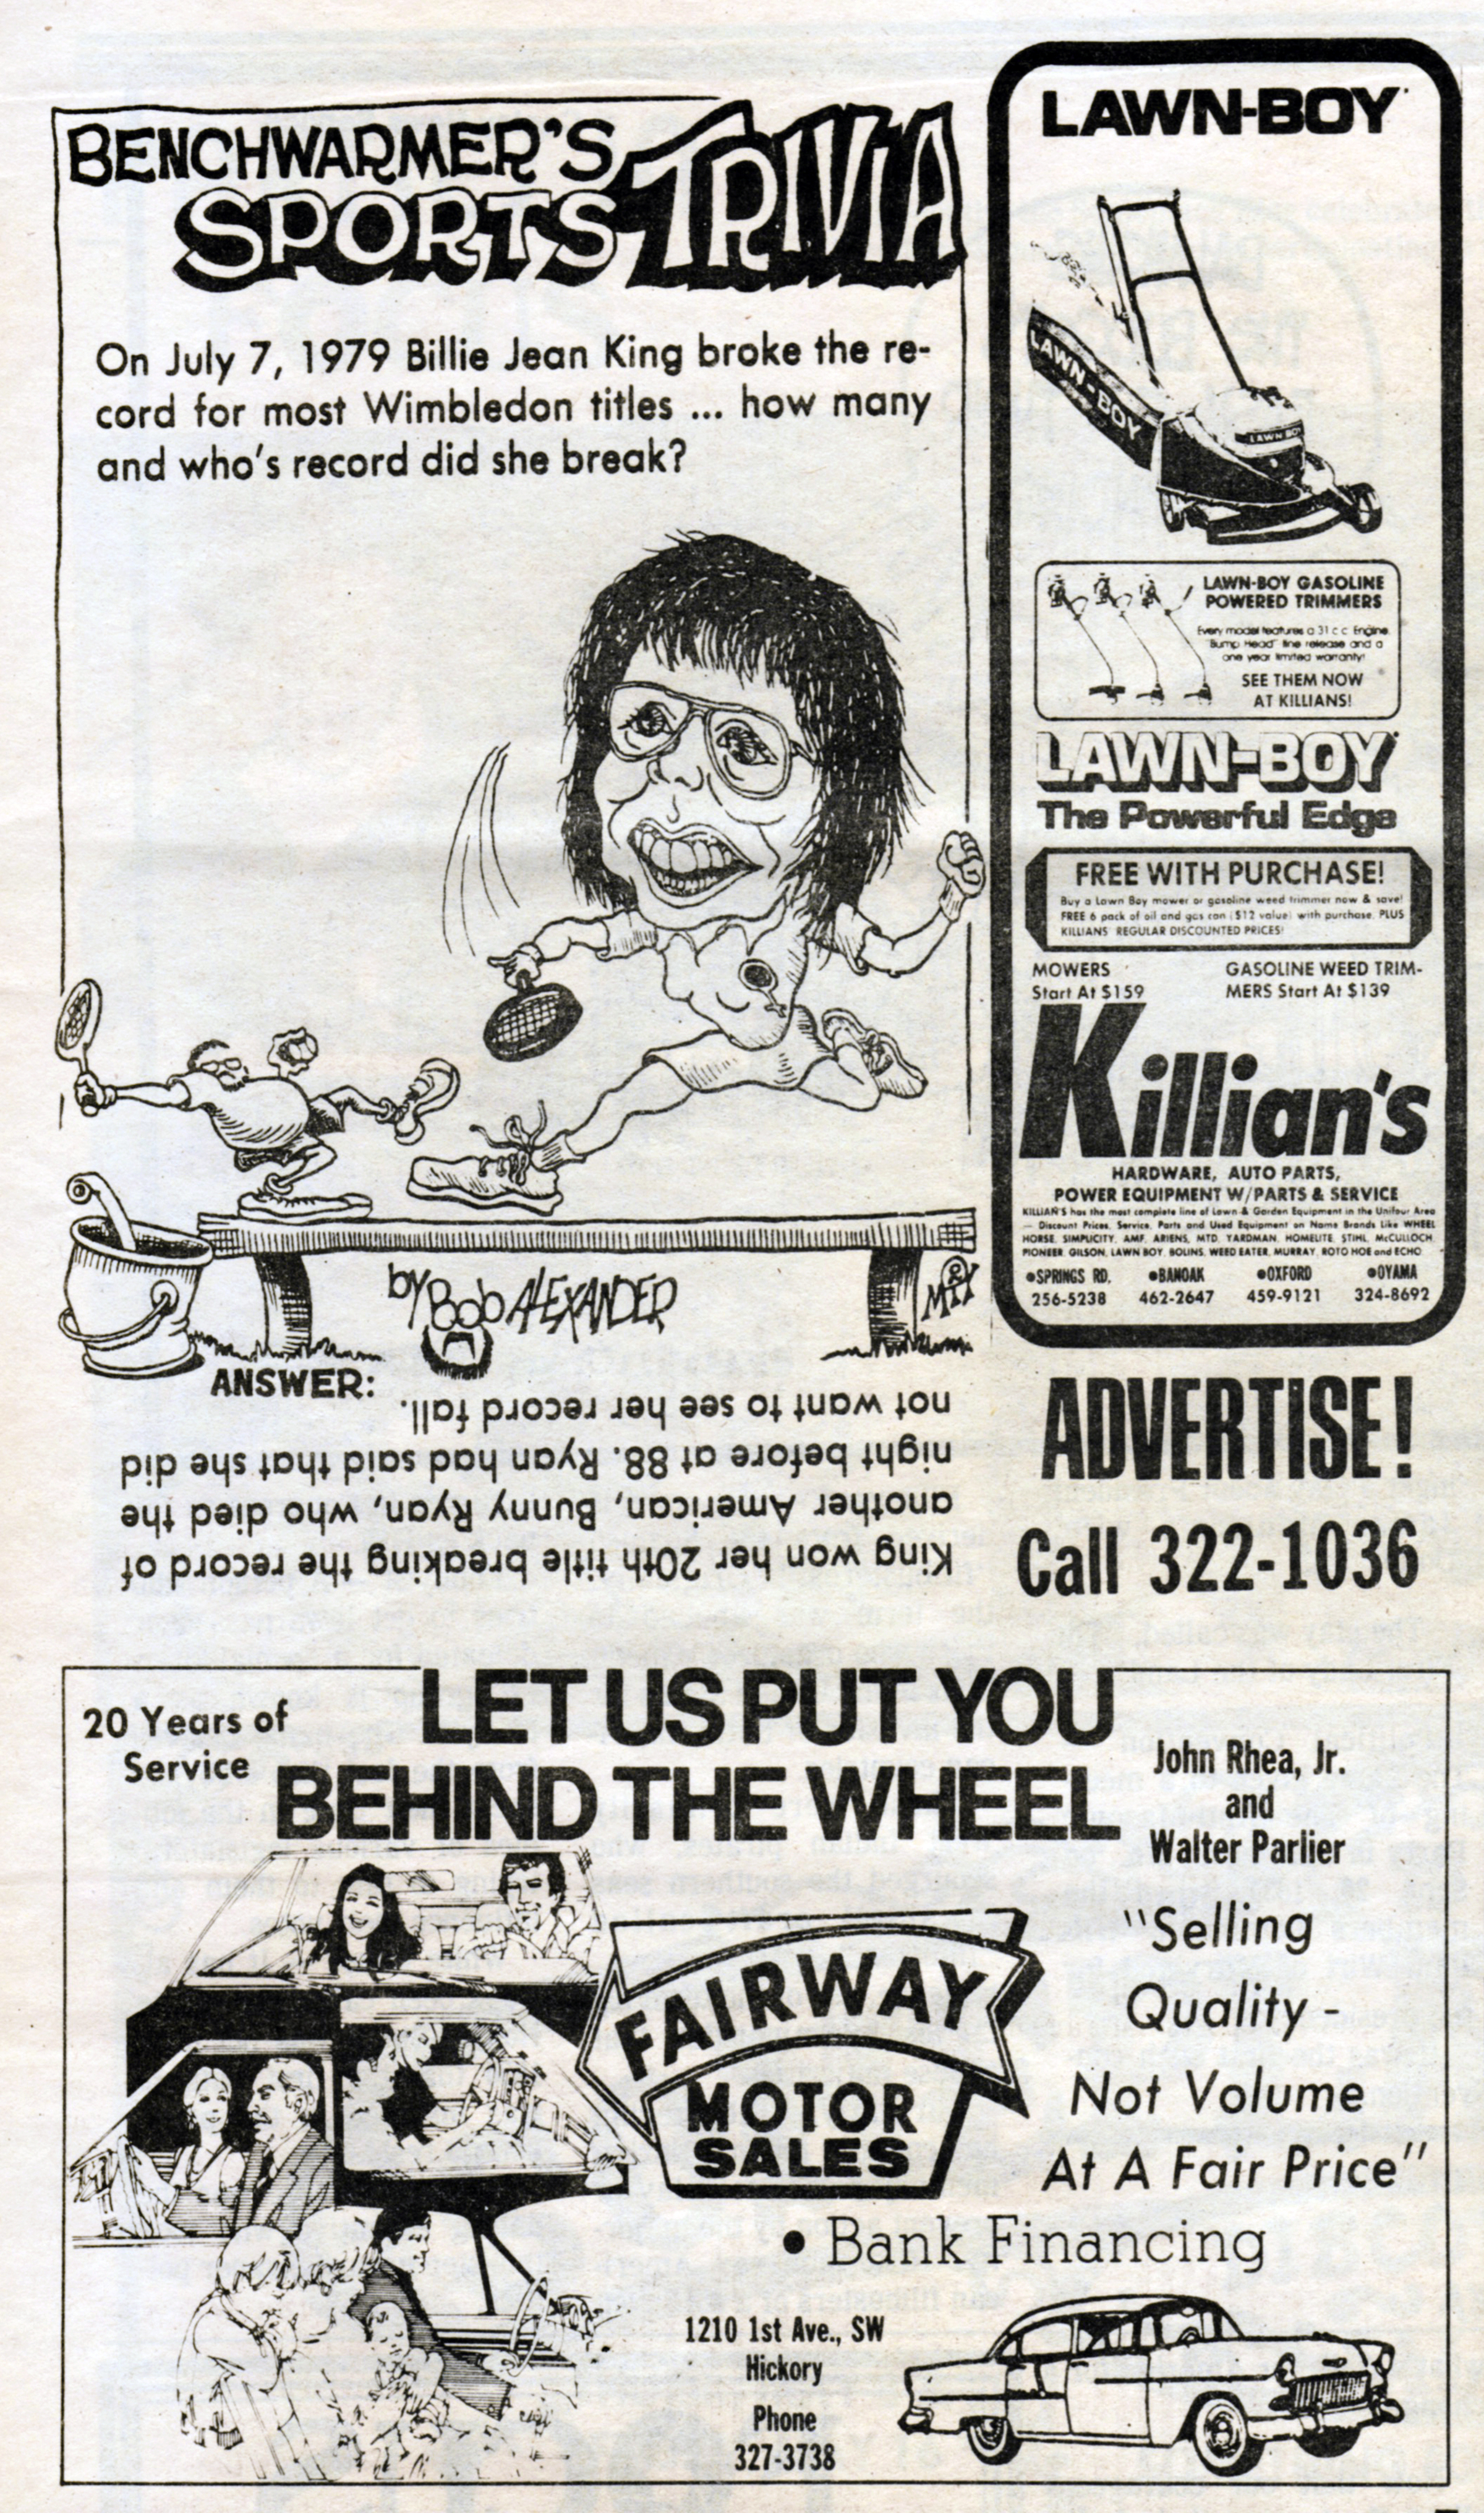 Advertisements for Killian's and Fairway Motor Sales along with Benchwarmer's Sports Trivia.